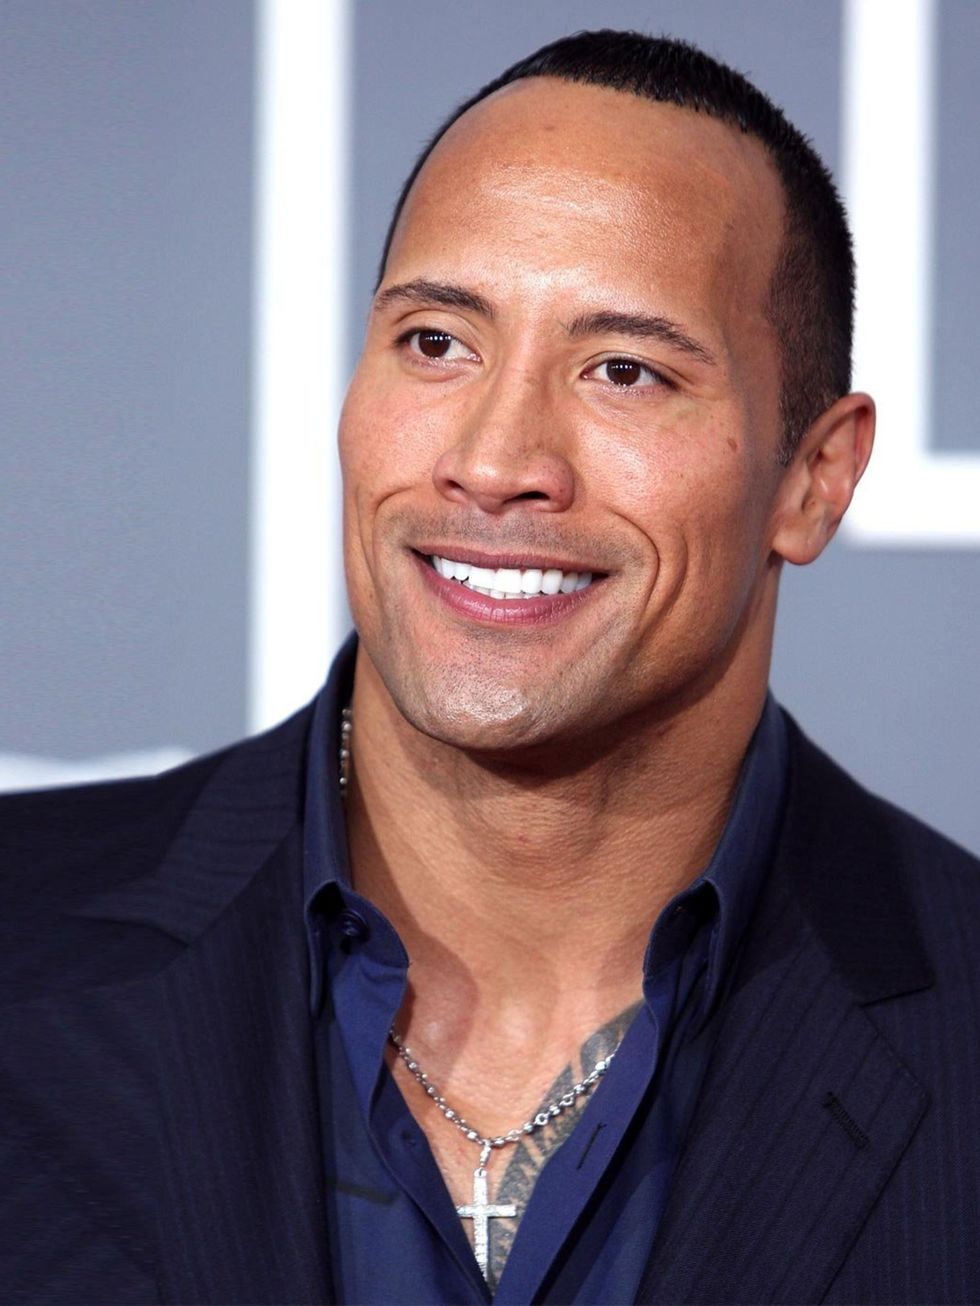 <p>Dwayne 'The Rock' Johnson: Christina Simone, Workflow Director. </p><p>'He looks hot in black tights, plays the ukelele, and is still masculine in a fairy costume.'</p>